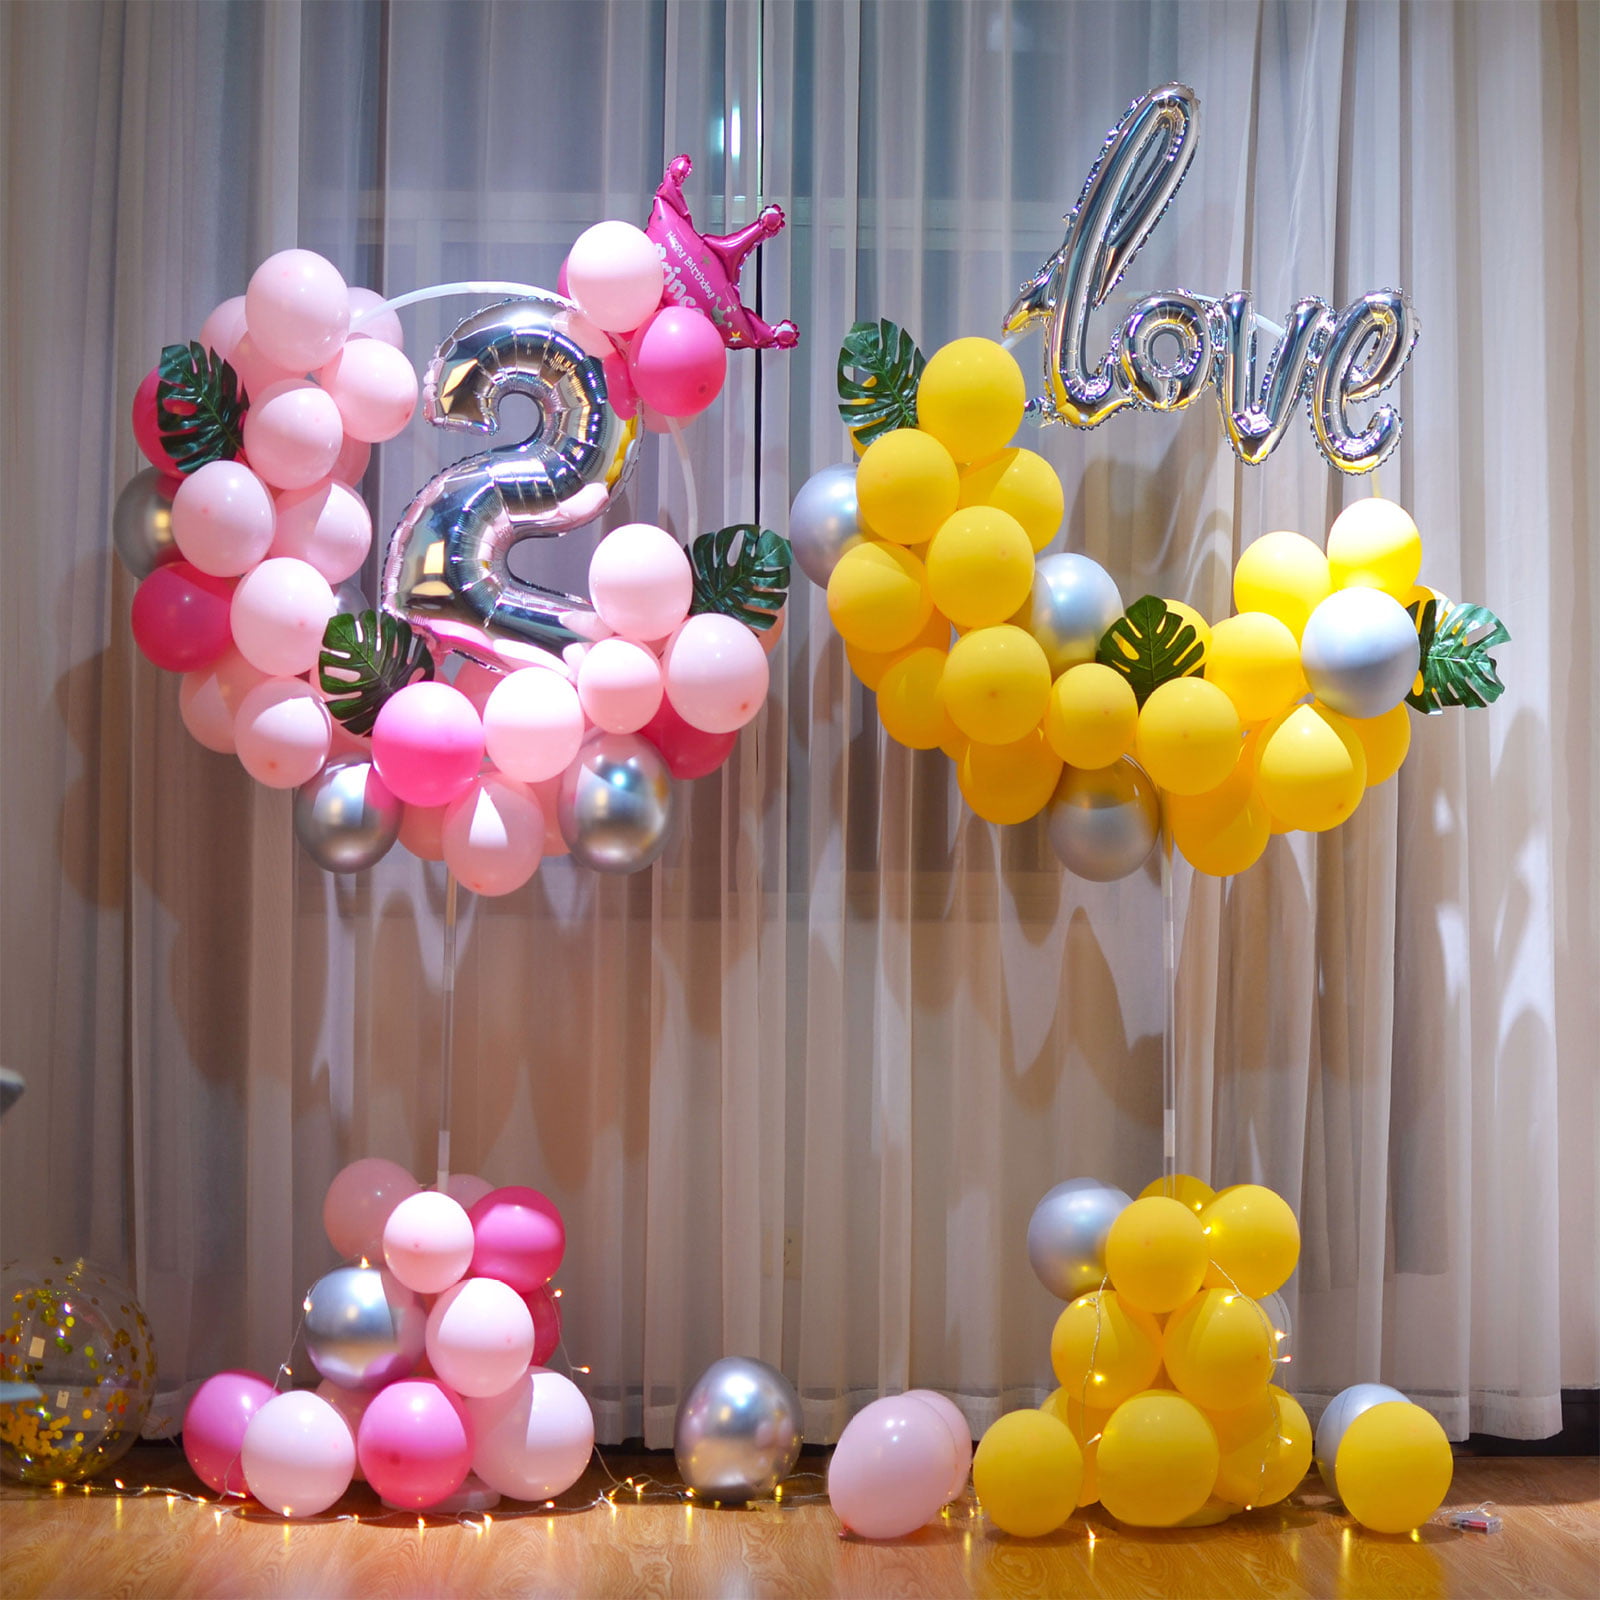 Table Balloon Decoration Display Kit ENGAGEMENT 3 Pack Party set No Helium